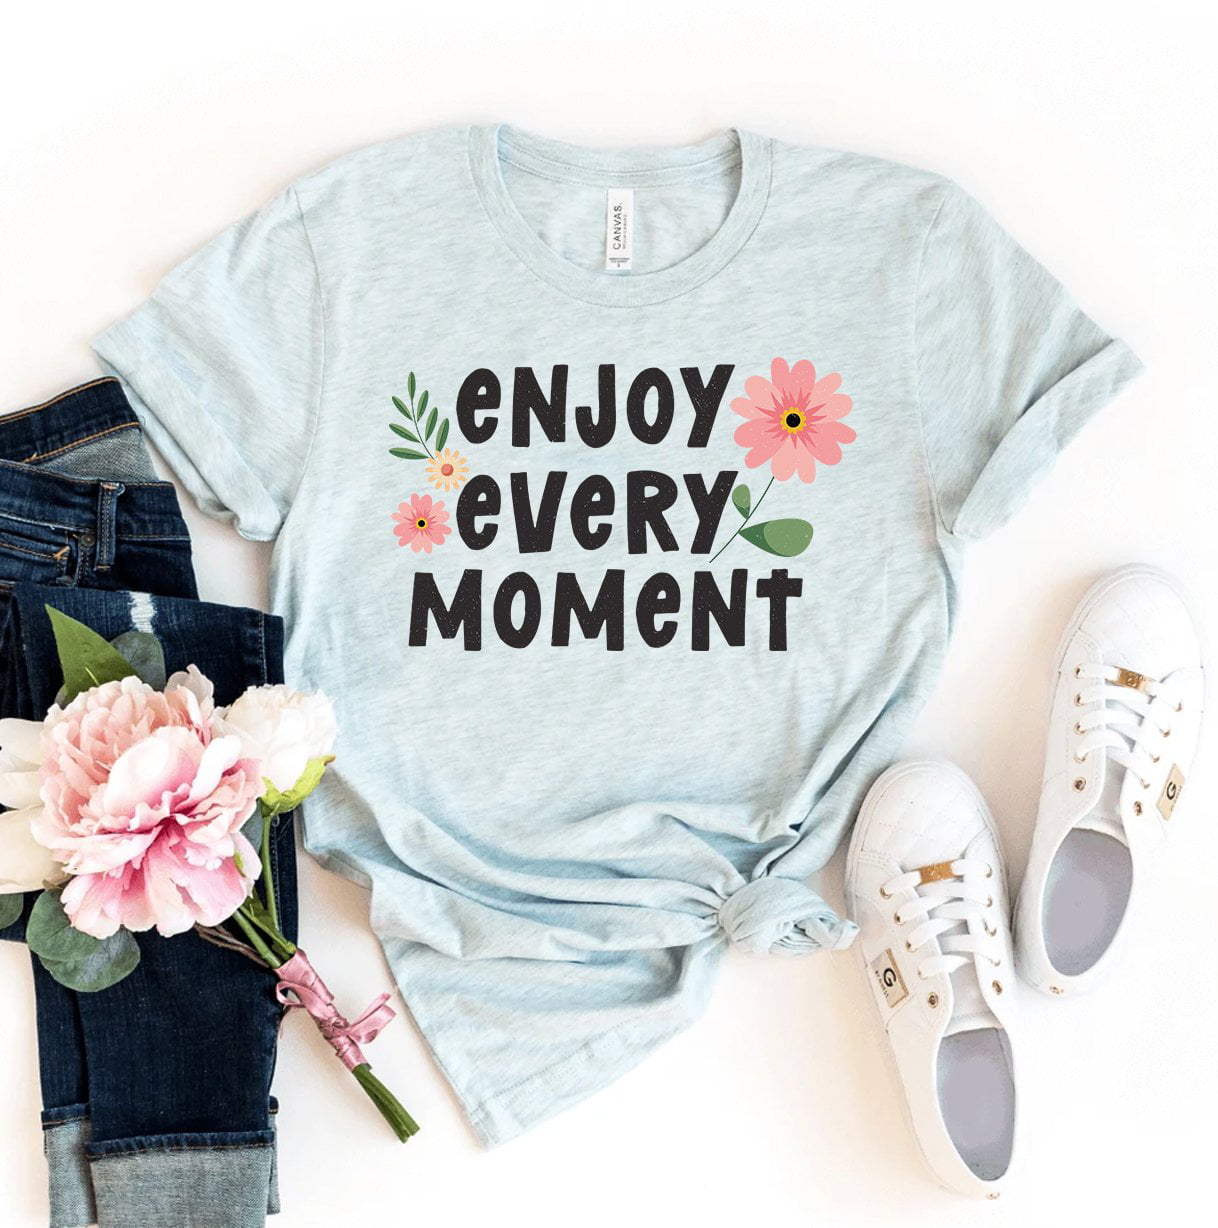 Inspirational shirt Gift for her Kindness and Love Fun Shirt Unisex Kindness Shirt Graphic Tee Gift for Women Mom T Shirt